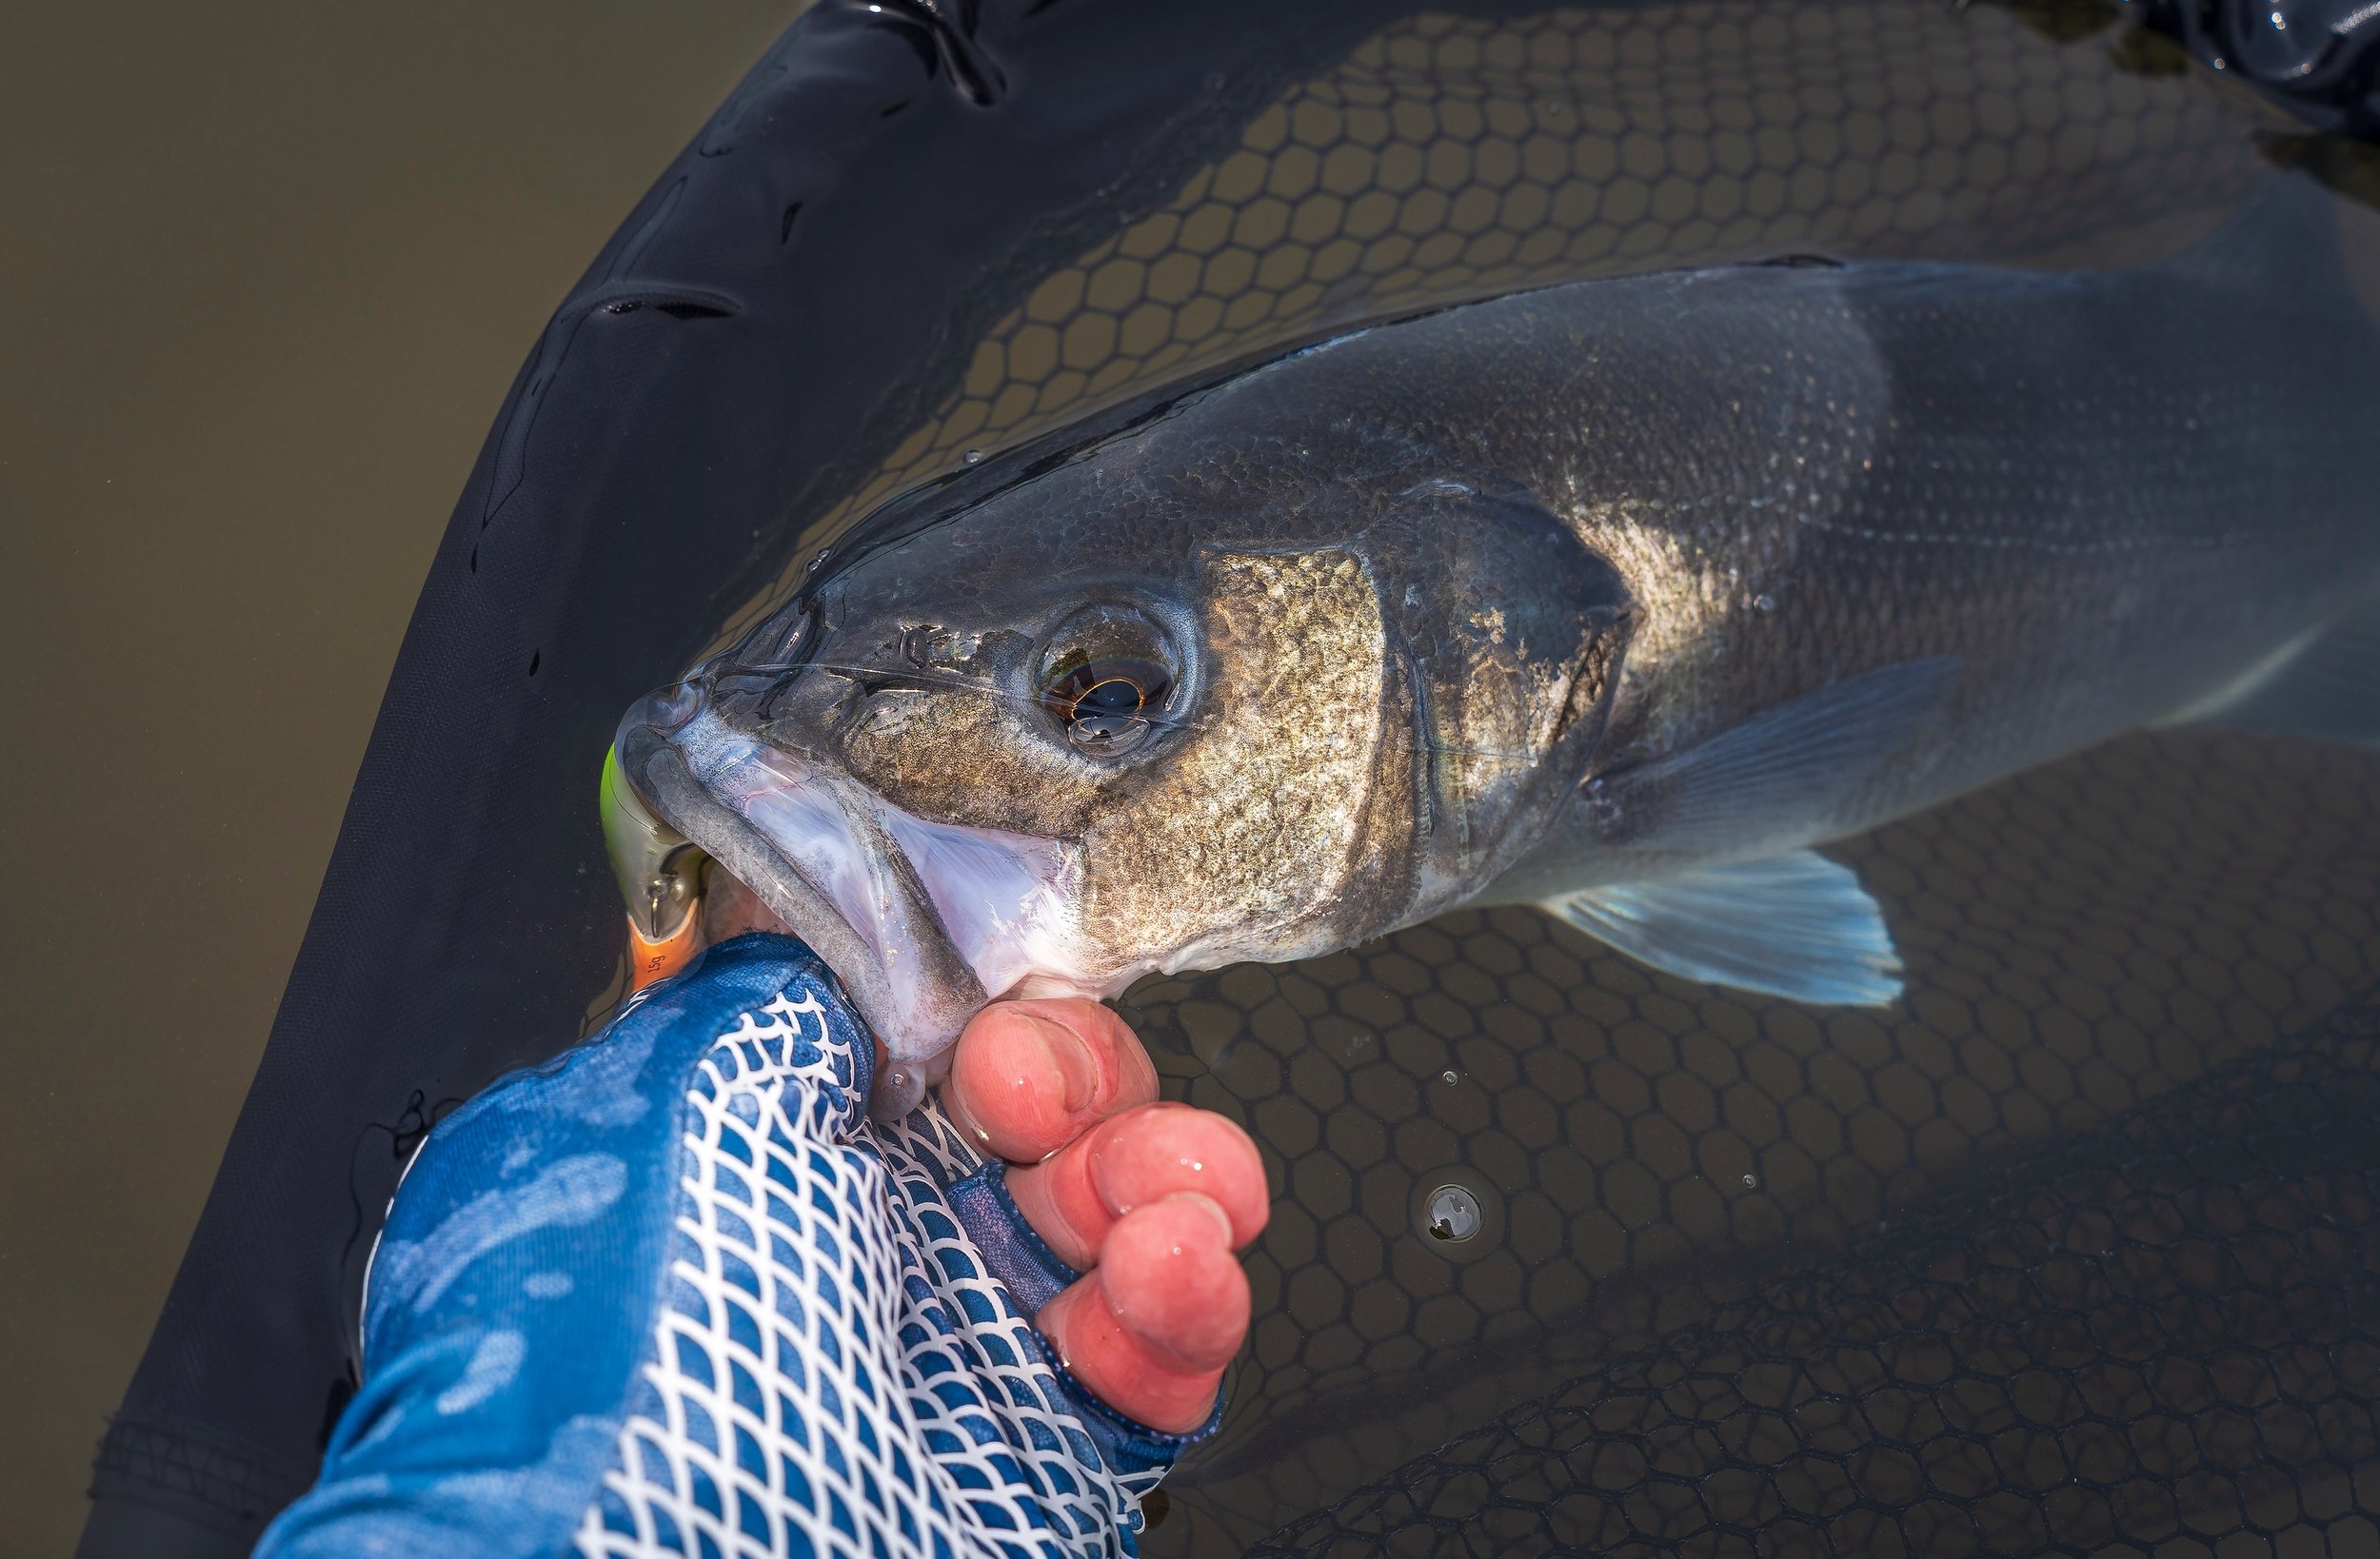 Why don't more bass anglers carry a landing net? Is it a macho